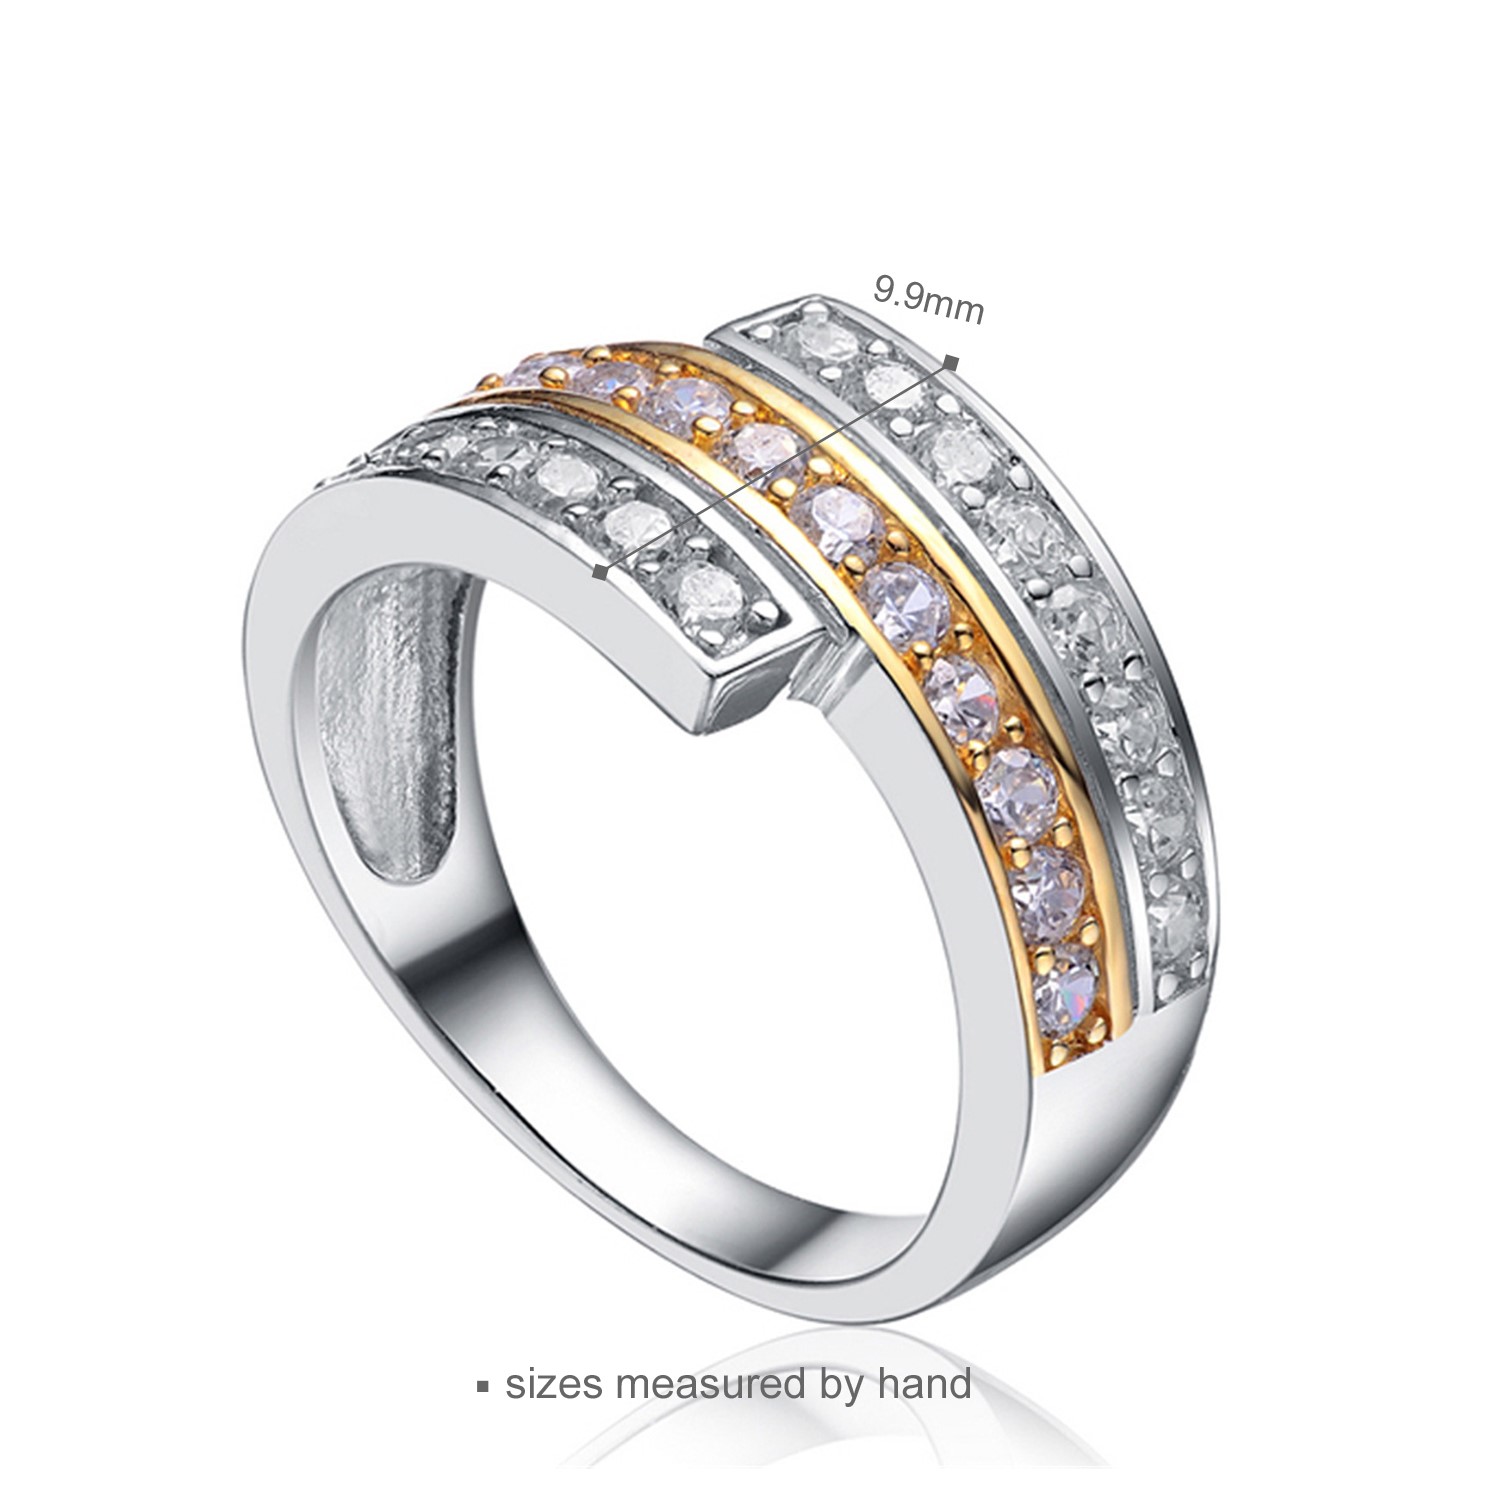 Ttwo Tone Rings Three Line Of CZ Fashion ring Wholesale Micro Paved Surprise Gift Women Trendy Jewel(图3)